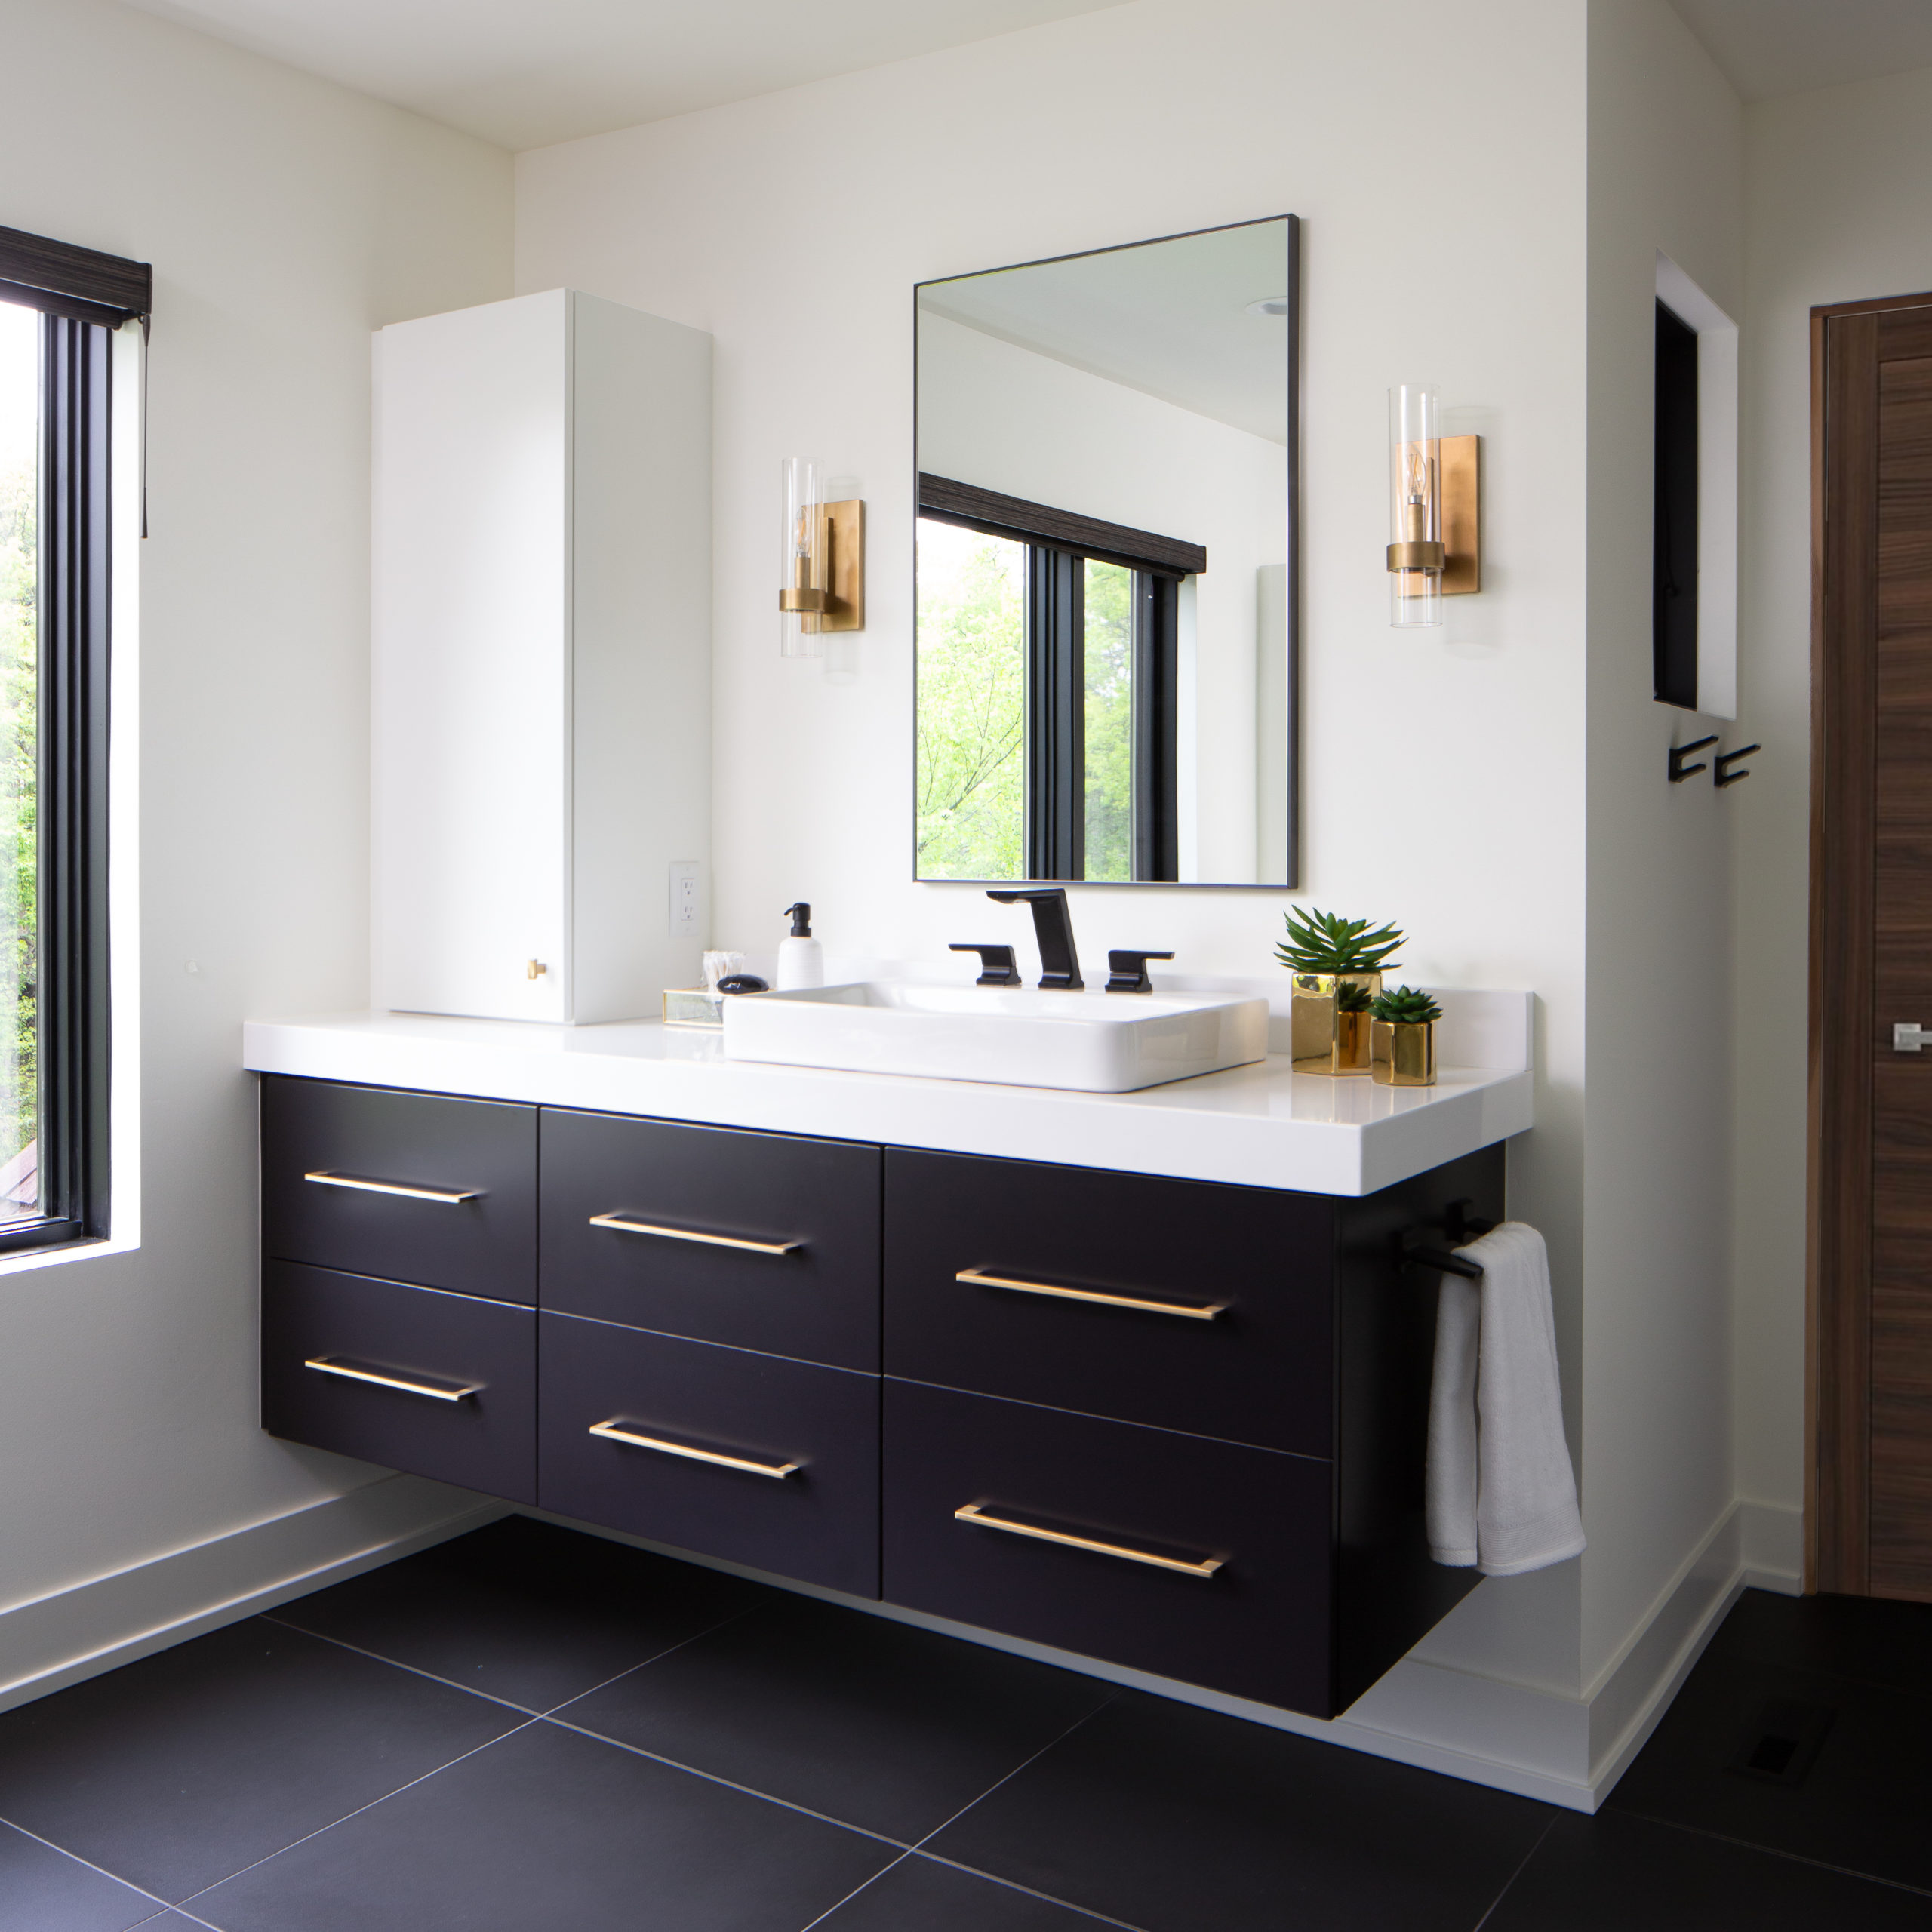 A bathroom with black cabinets and a window, showcasing our portfolio.